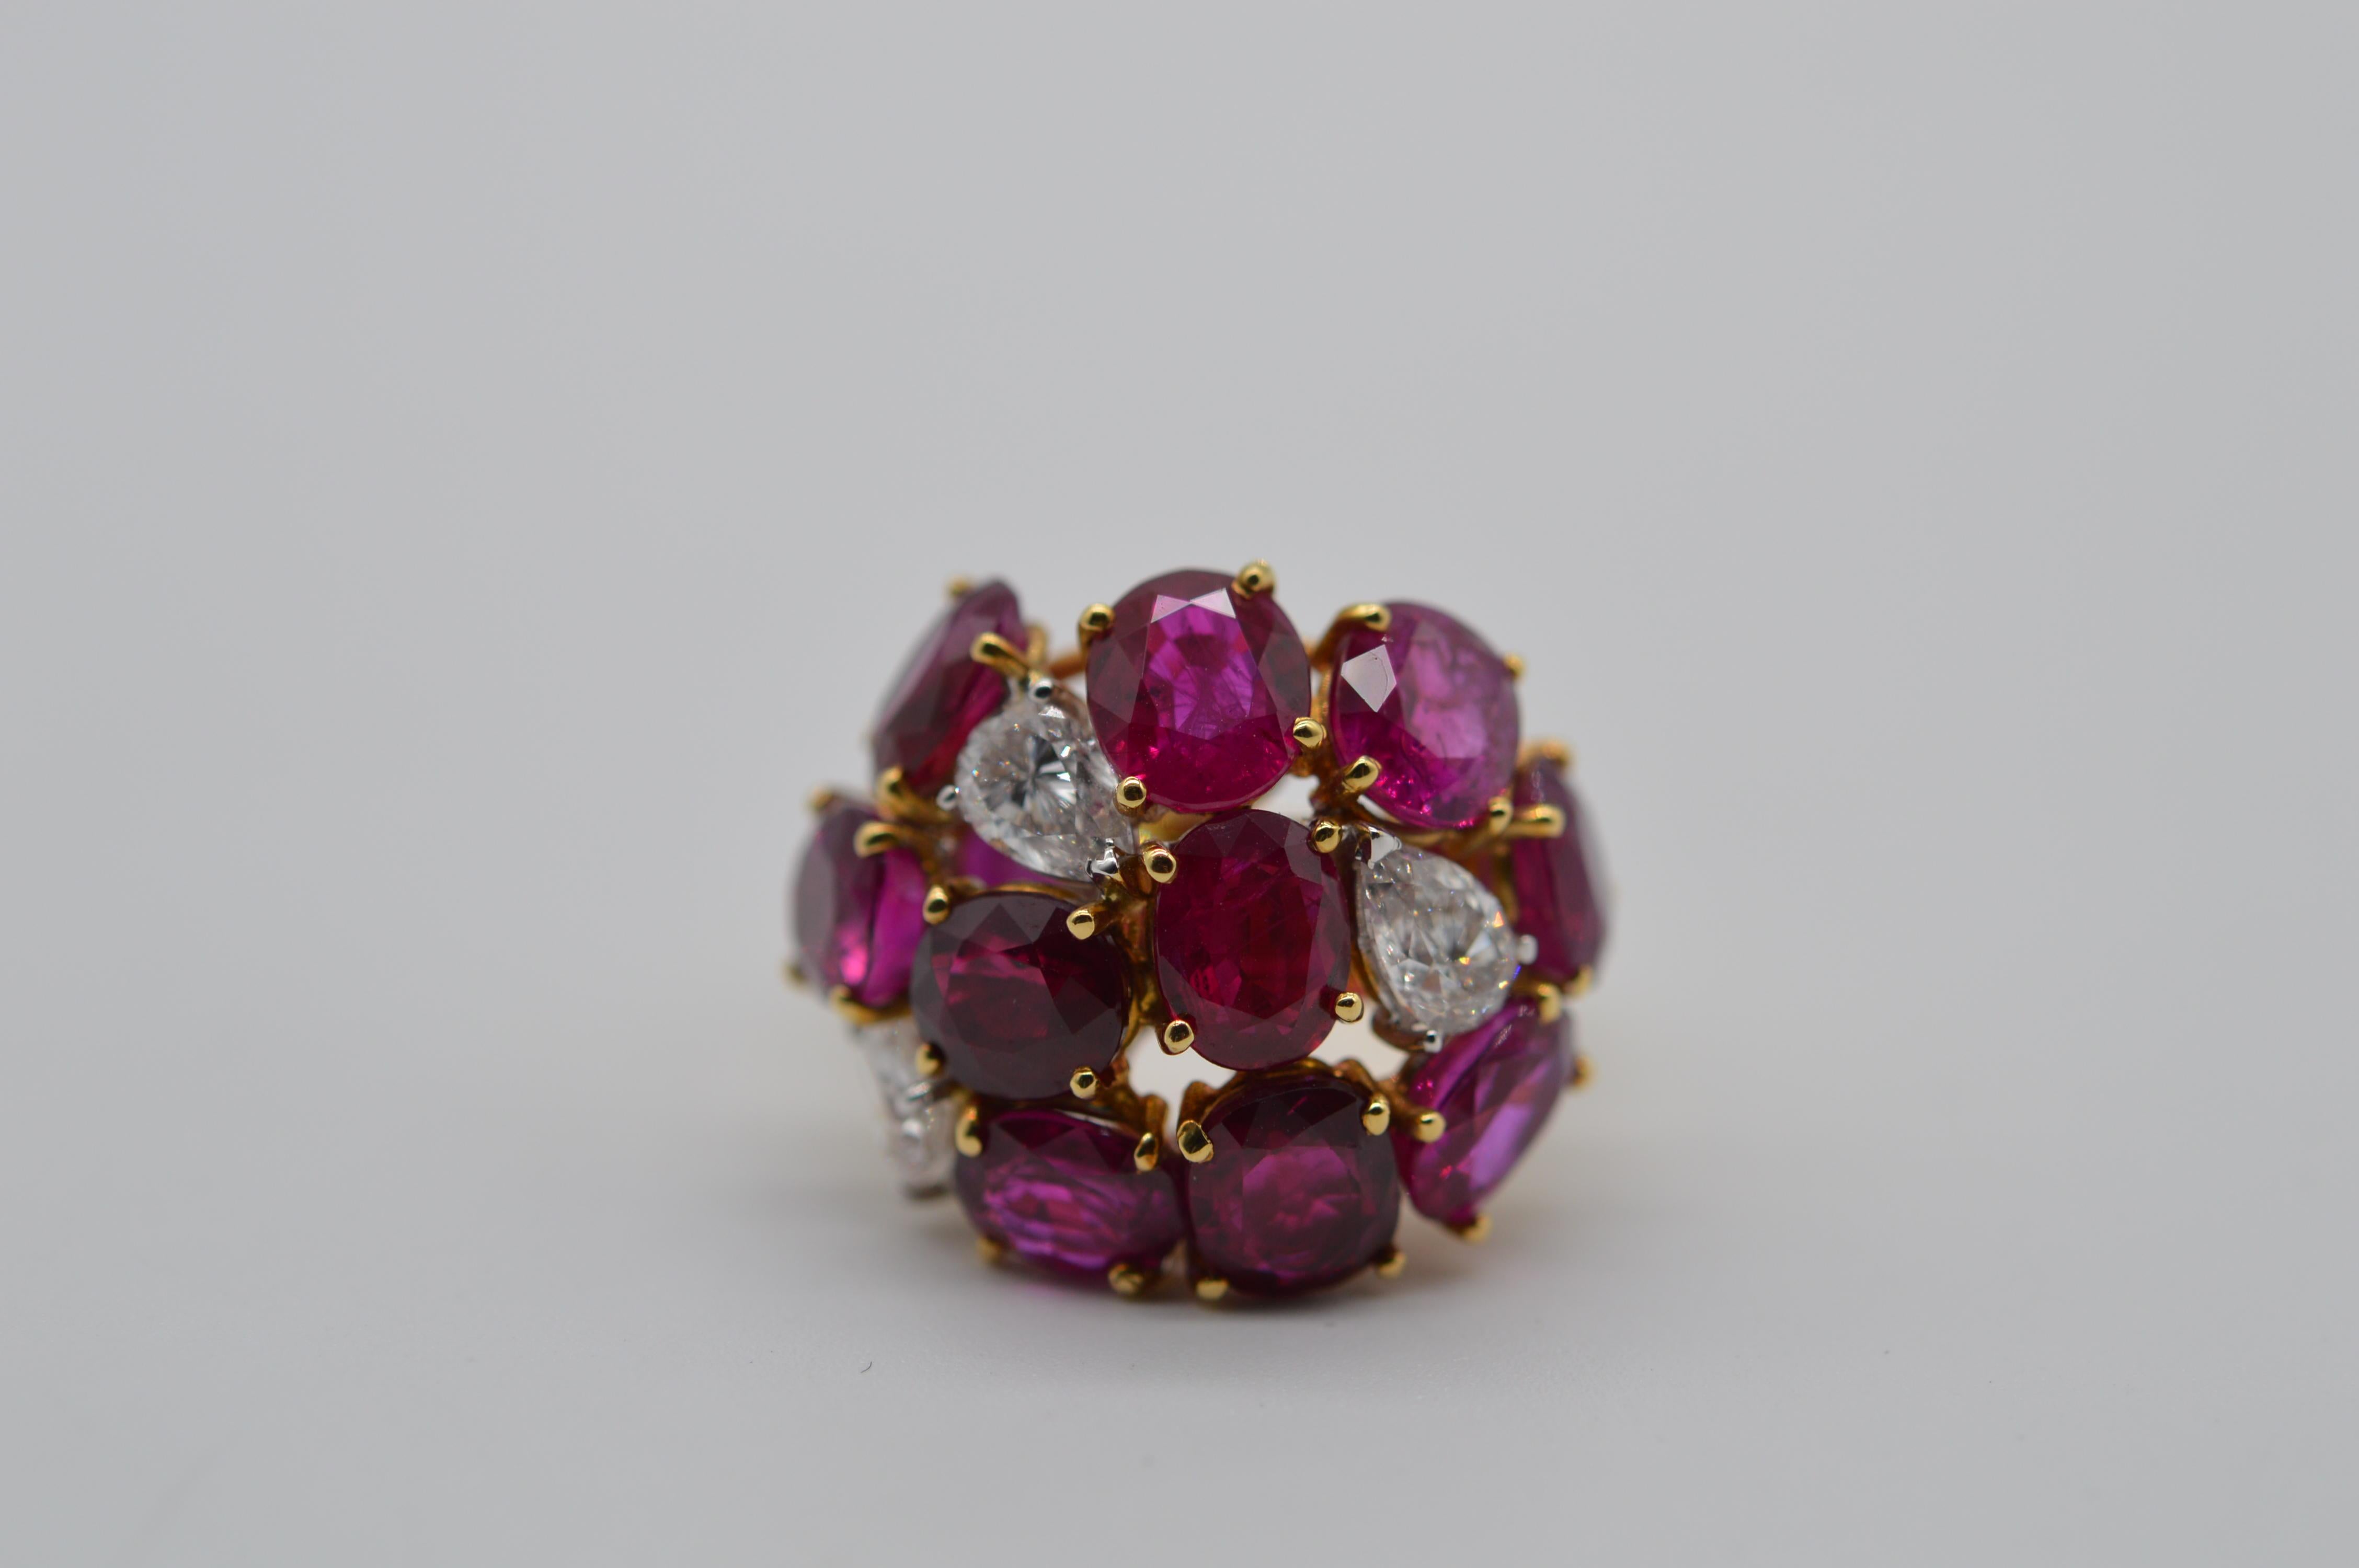 Burmese Oval Ruby 8.40 carats ring unworn
Mounted in an 18K Yellow Gold Ring
The ring size is 51
The total weight of the ring is 10.7 grams
Set with 3 Pearshape Diamonds for a total weight of 0.85 carats
Unworn condition